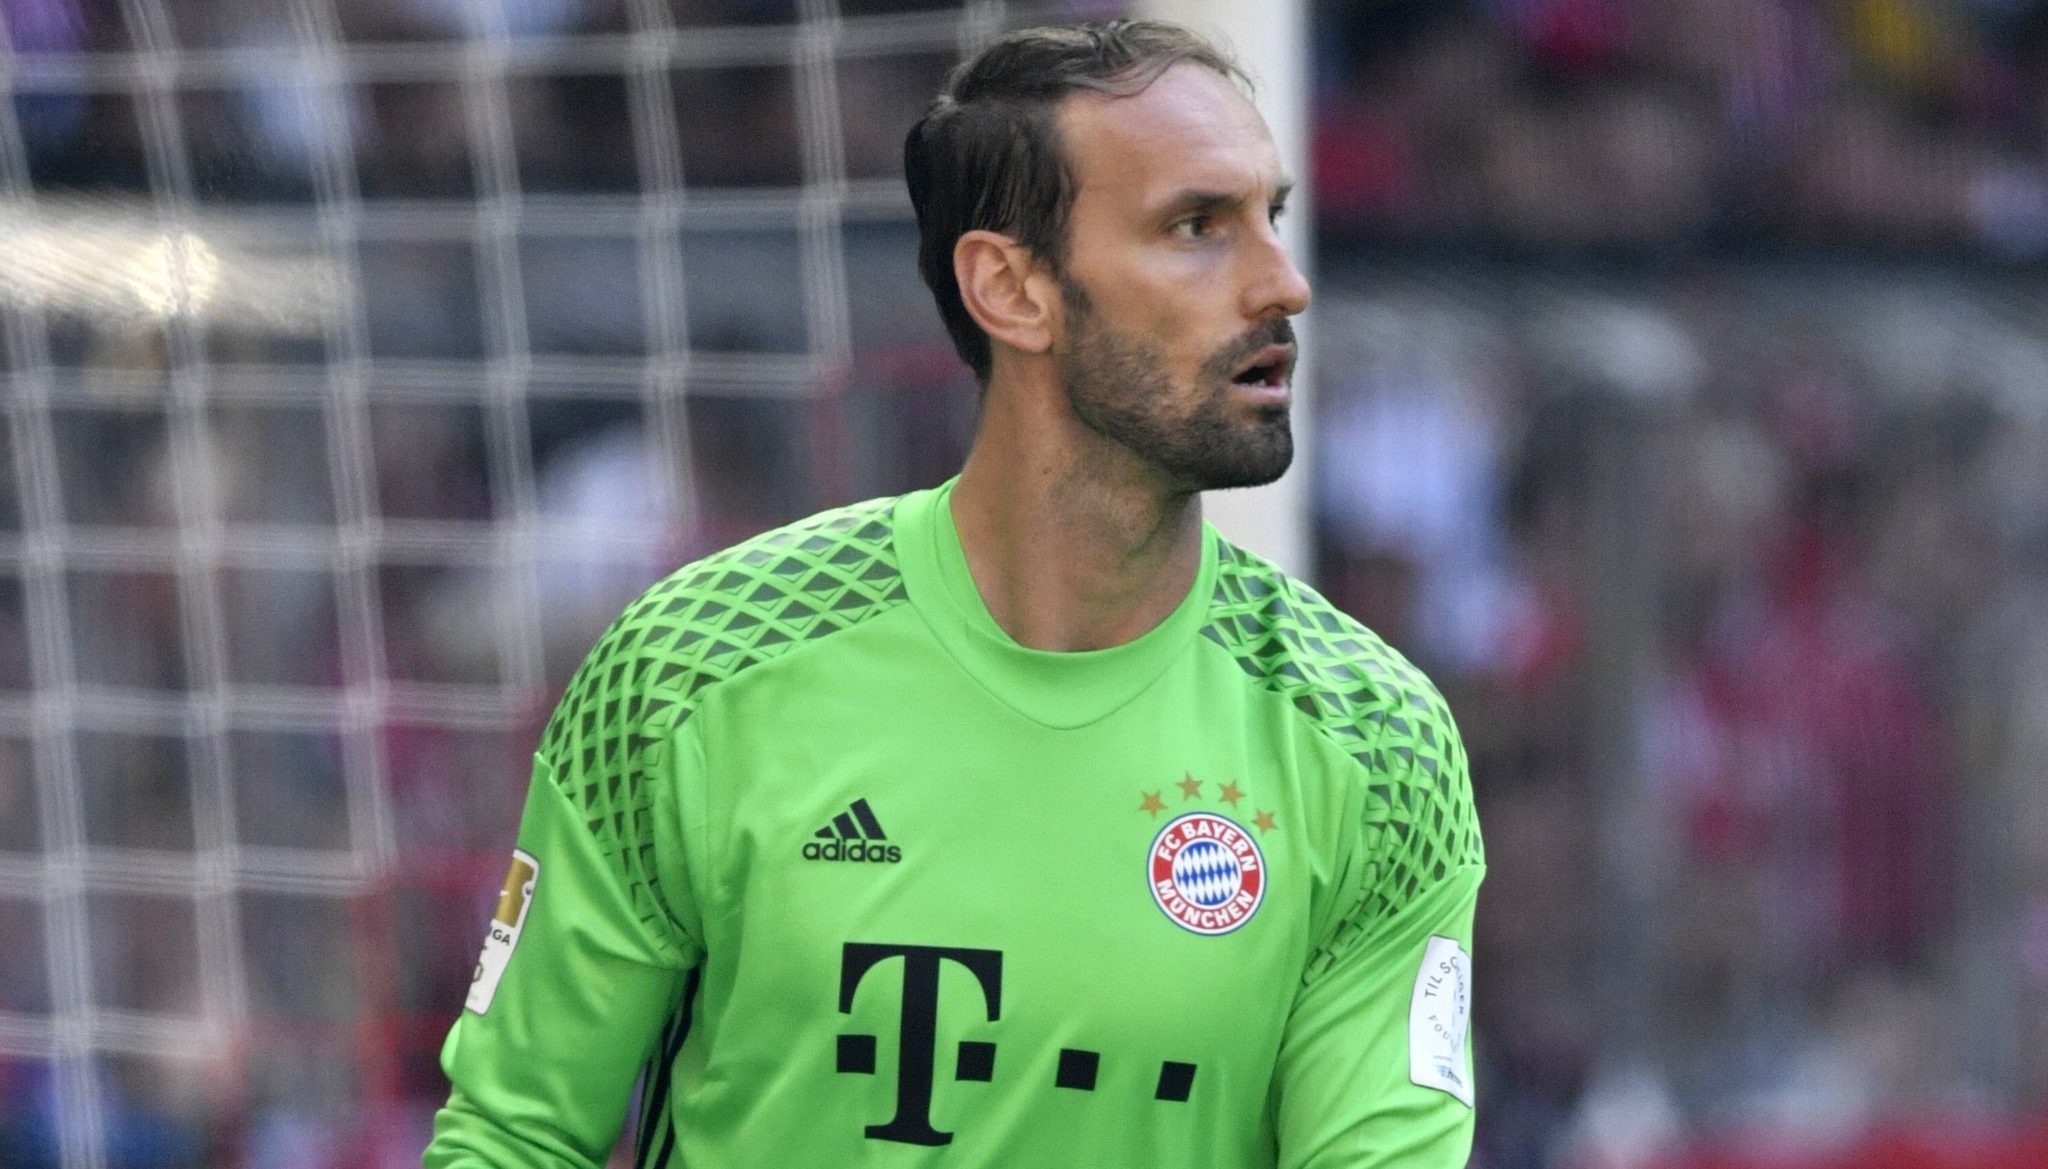 The goalkeeper who returned from retirement to defend the goal of all Bayern Munich